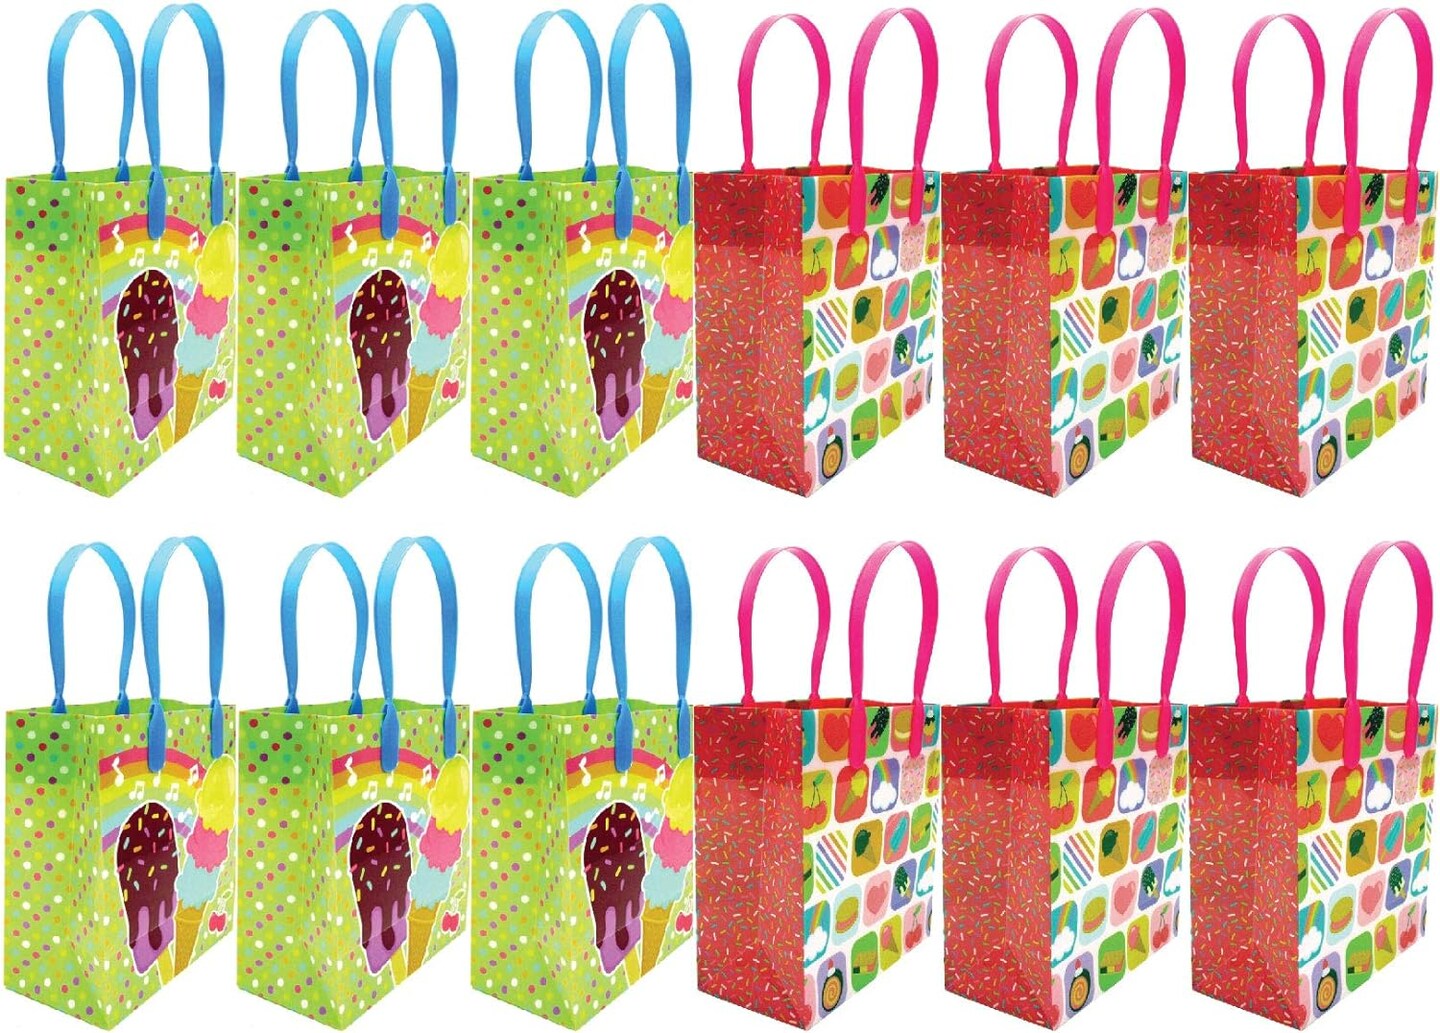 Tiny Mills Ice Cream Party Favor Bags Treat Bags with Handles Candy Bags for Birthday Party ,12 Pack